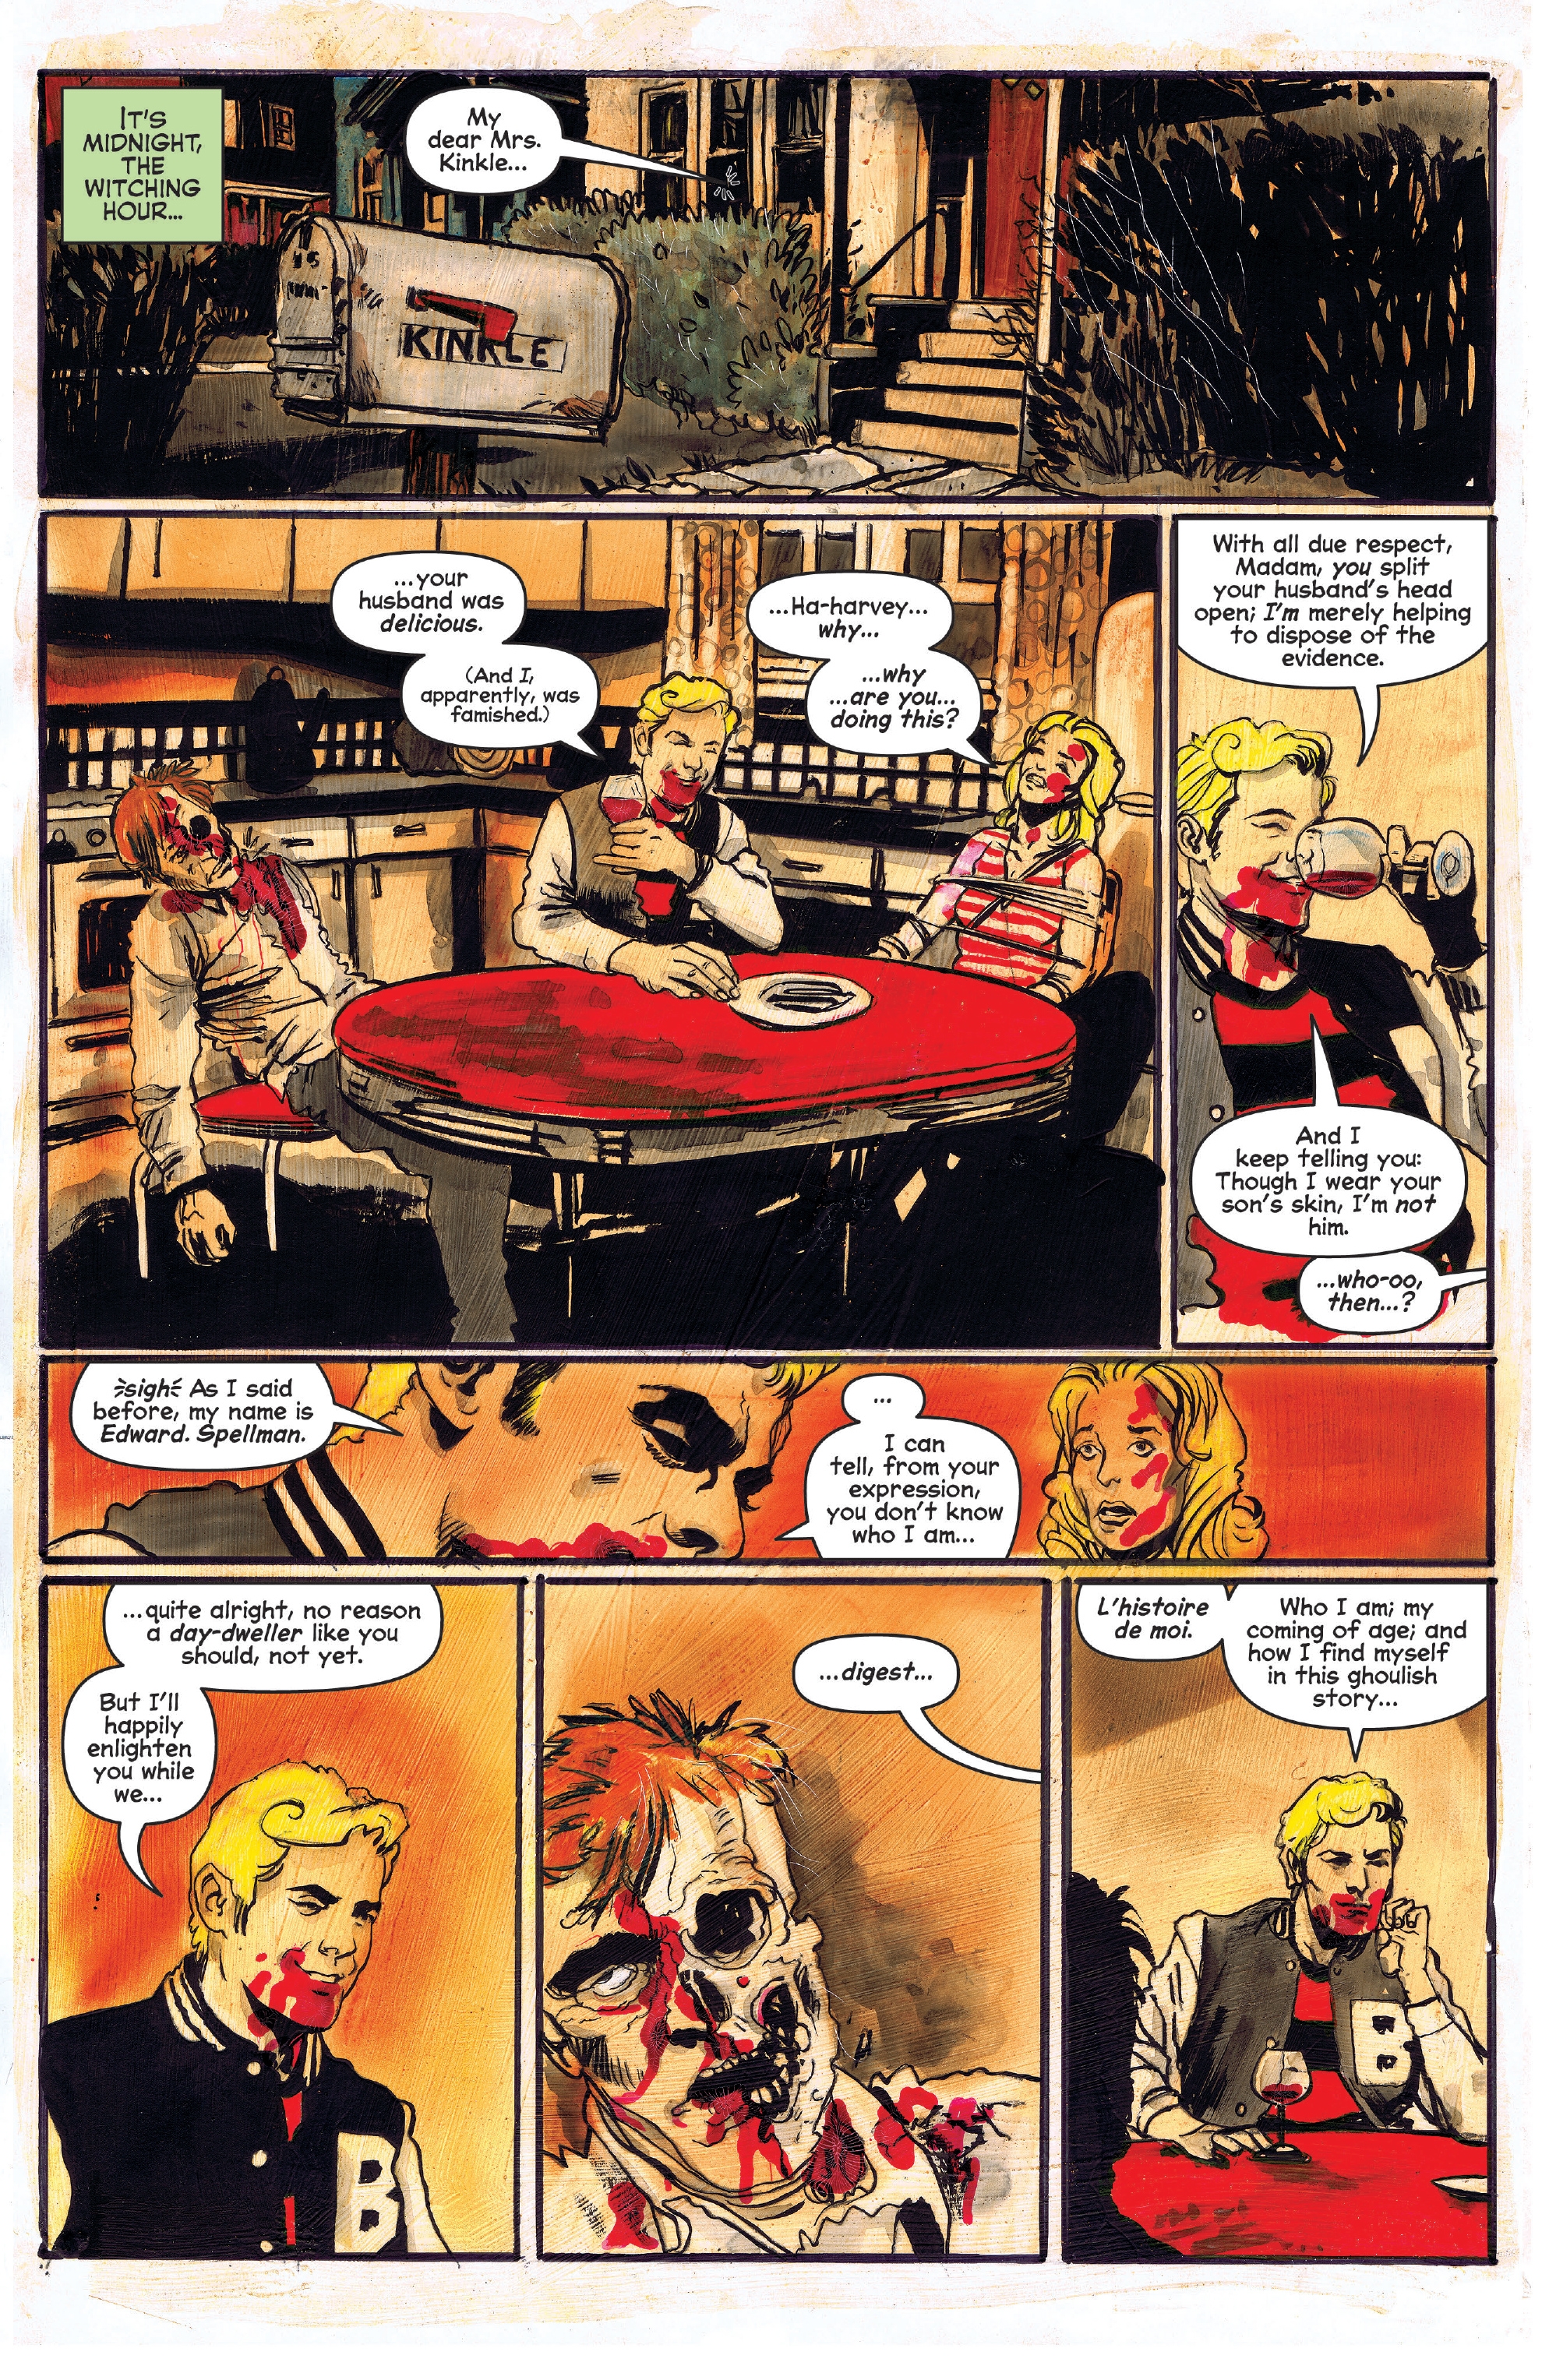 Chilling Adventures of Sabrina  (2014-): Chapter 7 - Page 3